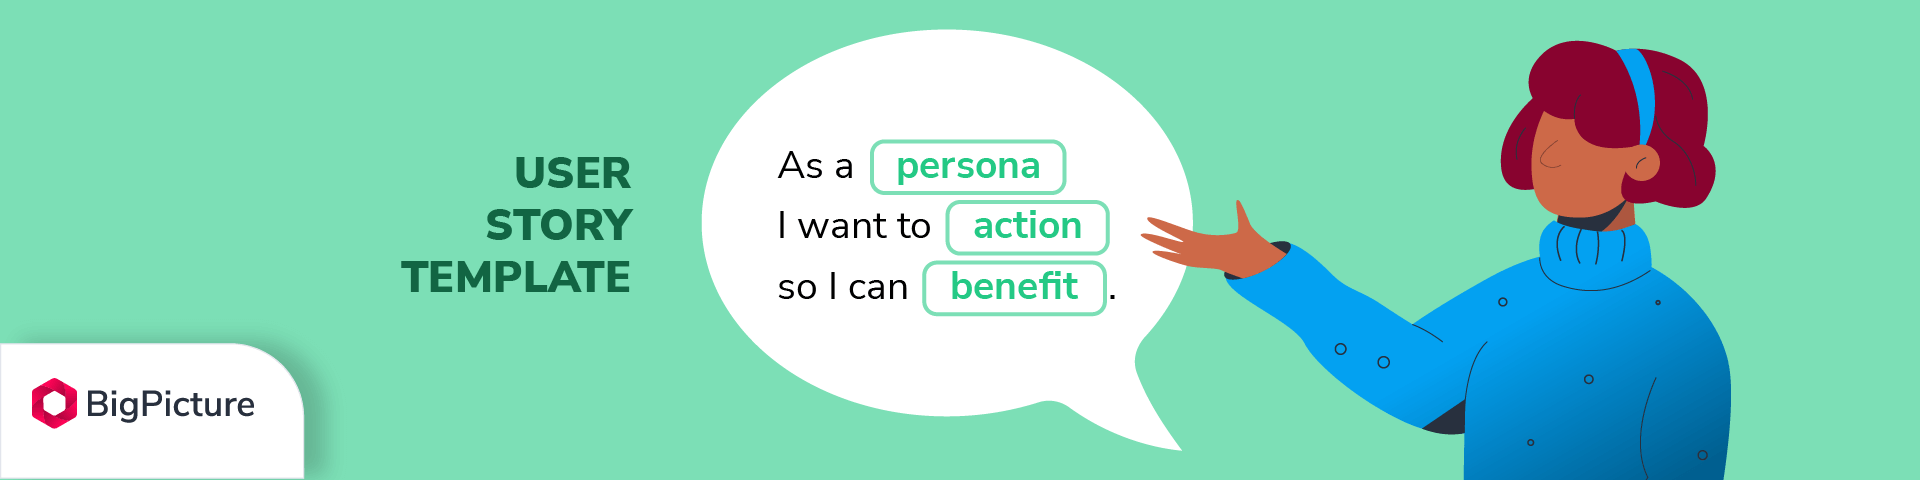 A template for writing user stoiries: as a (persona), I want (action), so I can (benefit)